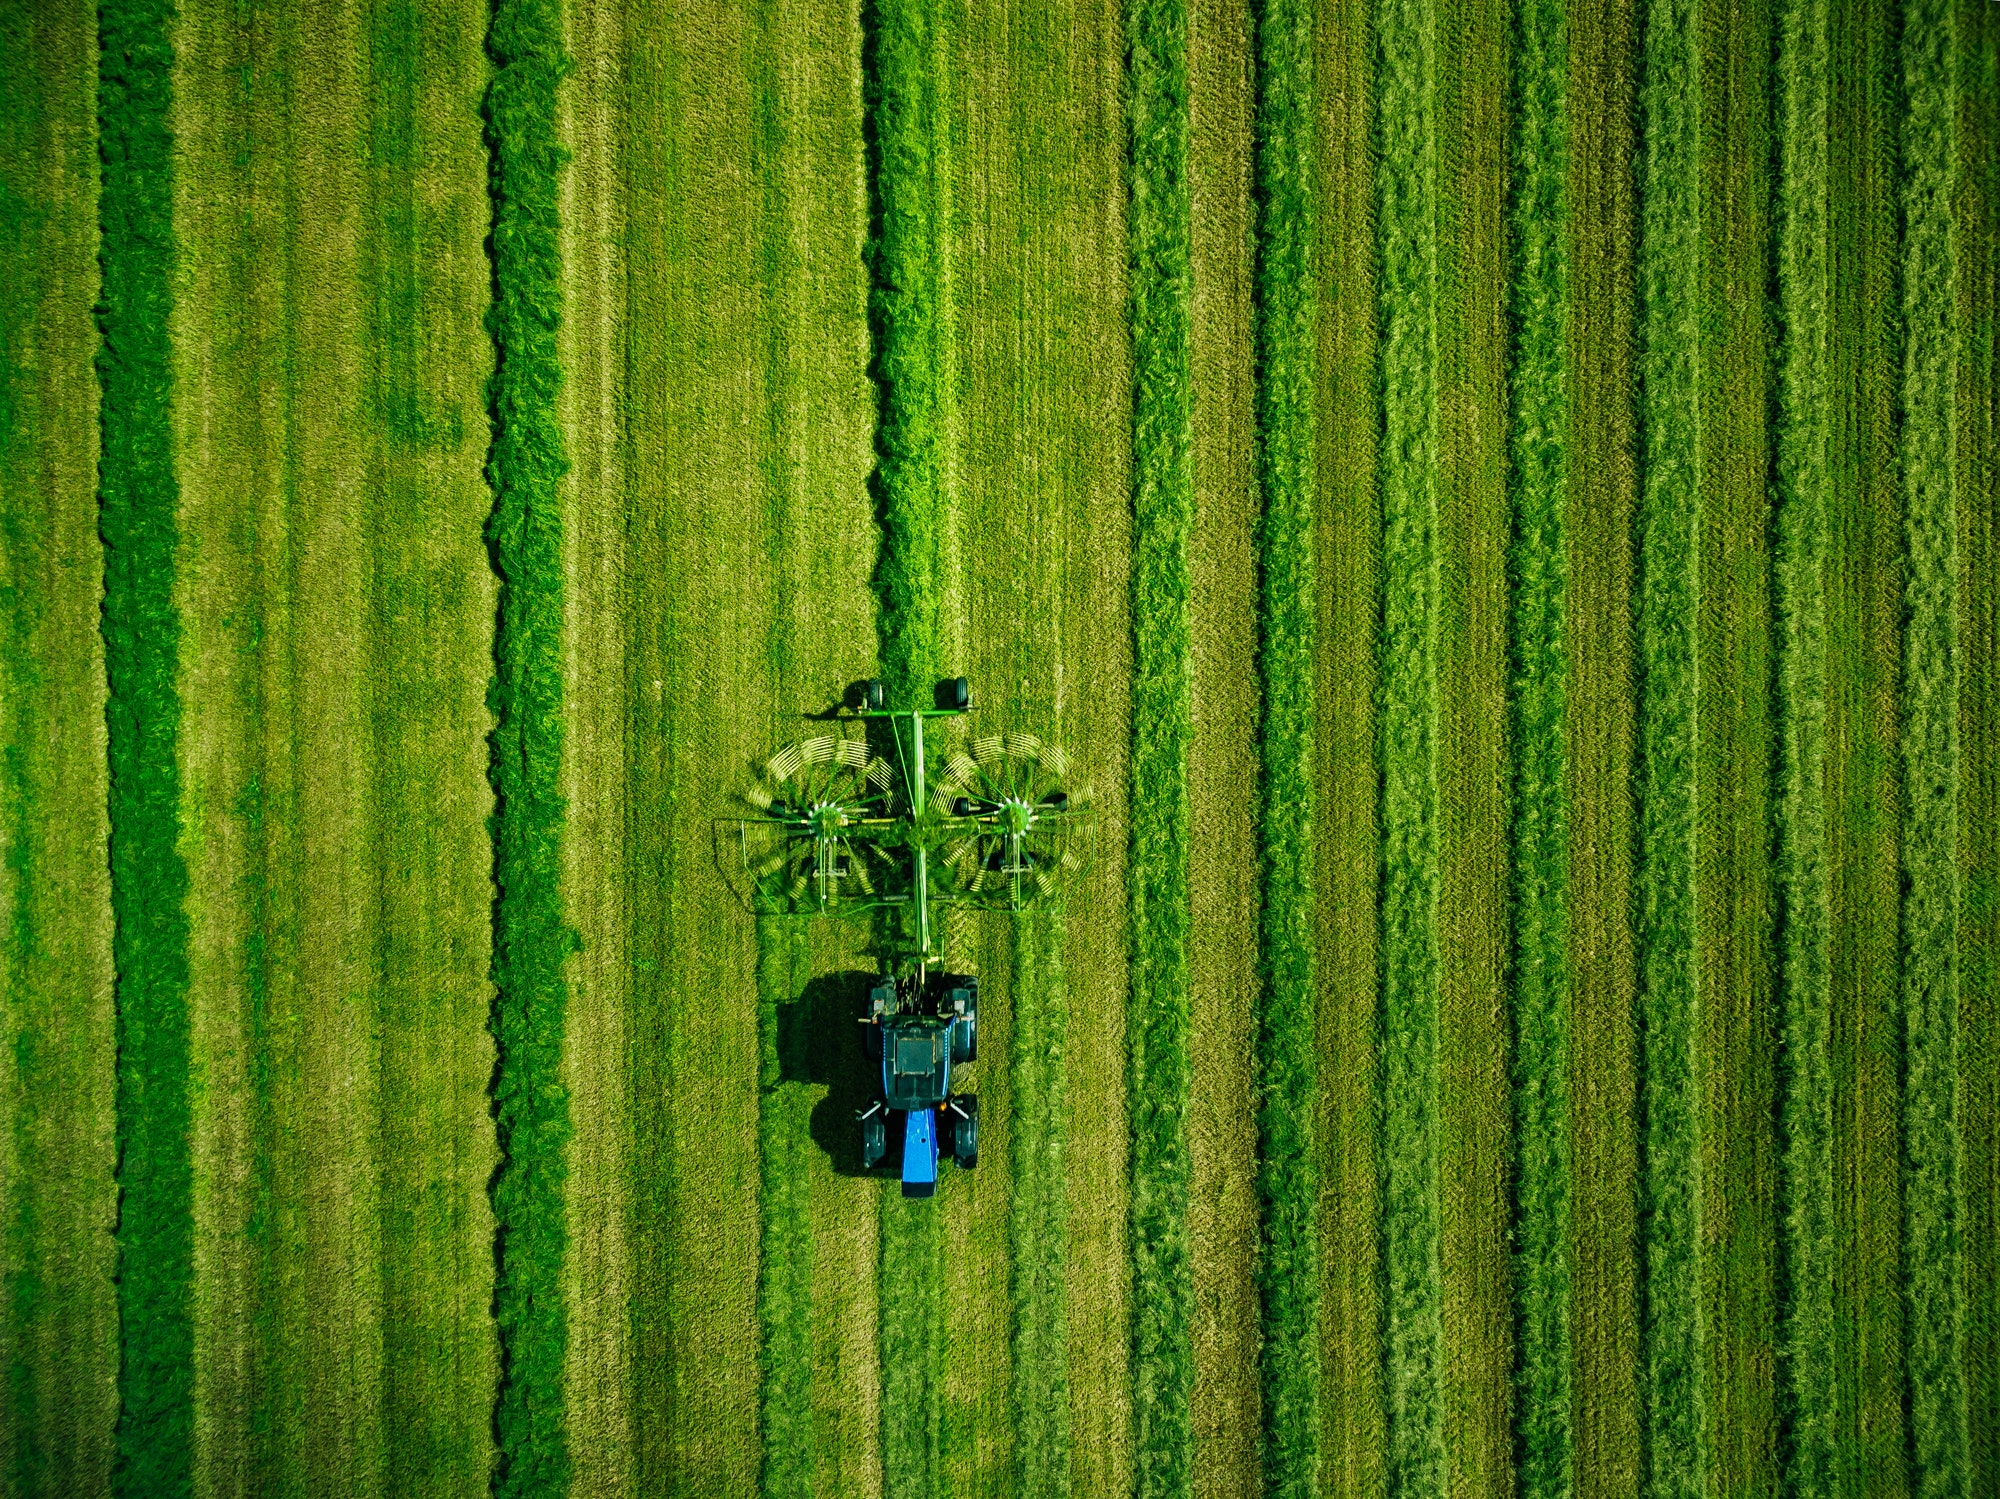 Aerial view of Tractor mowing green field in Finland.